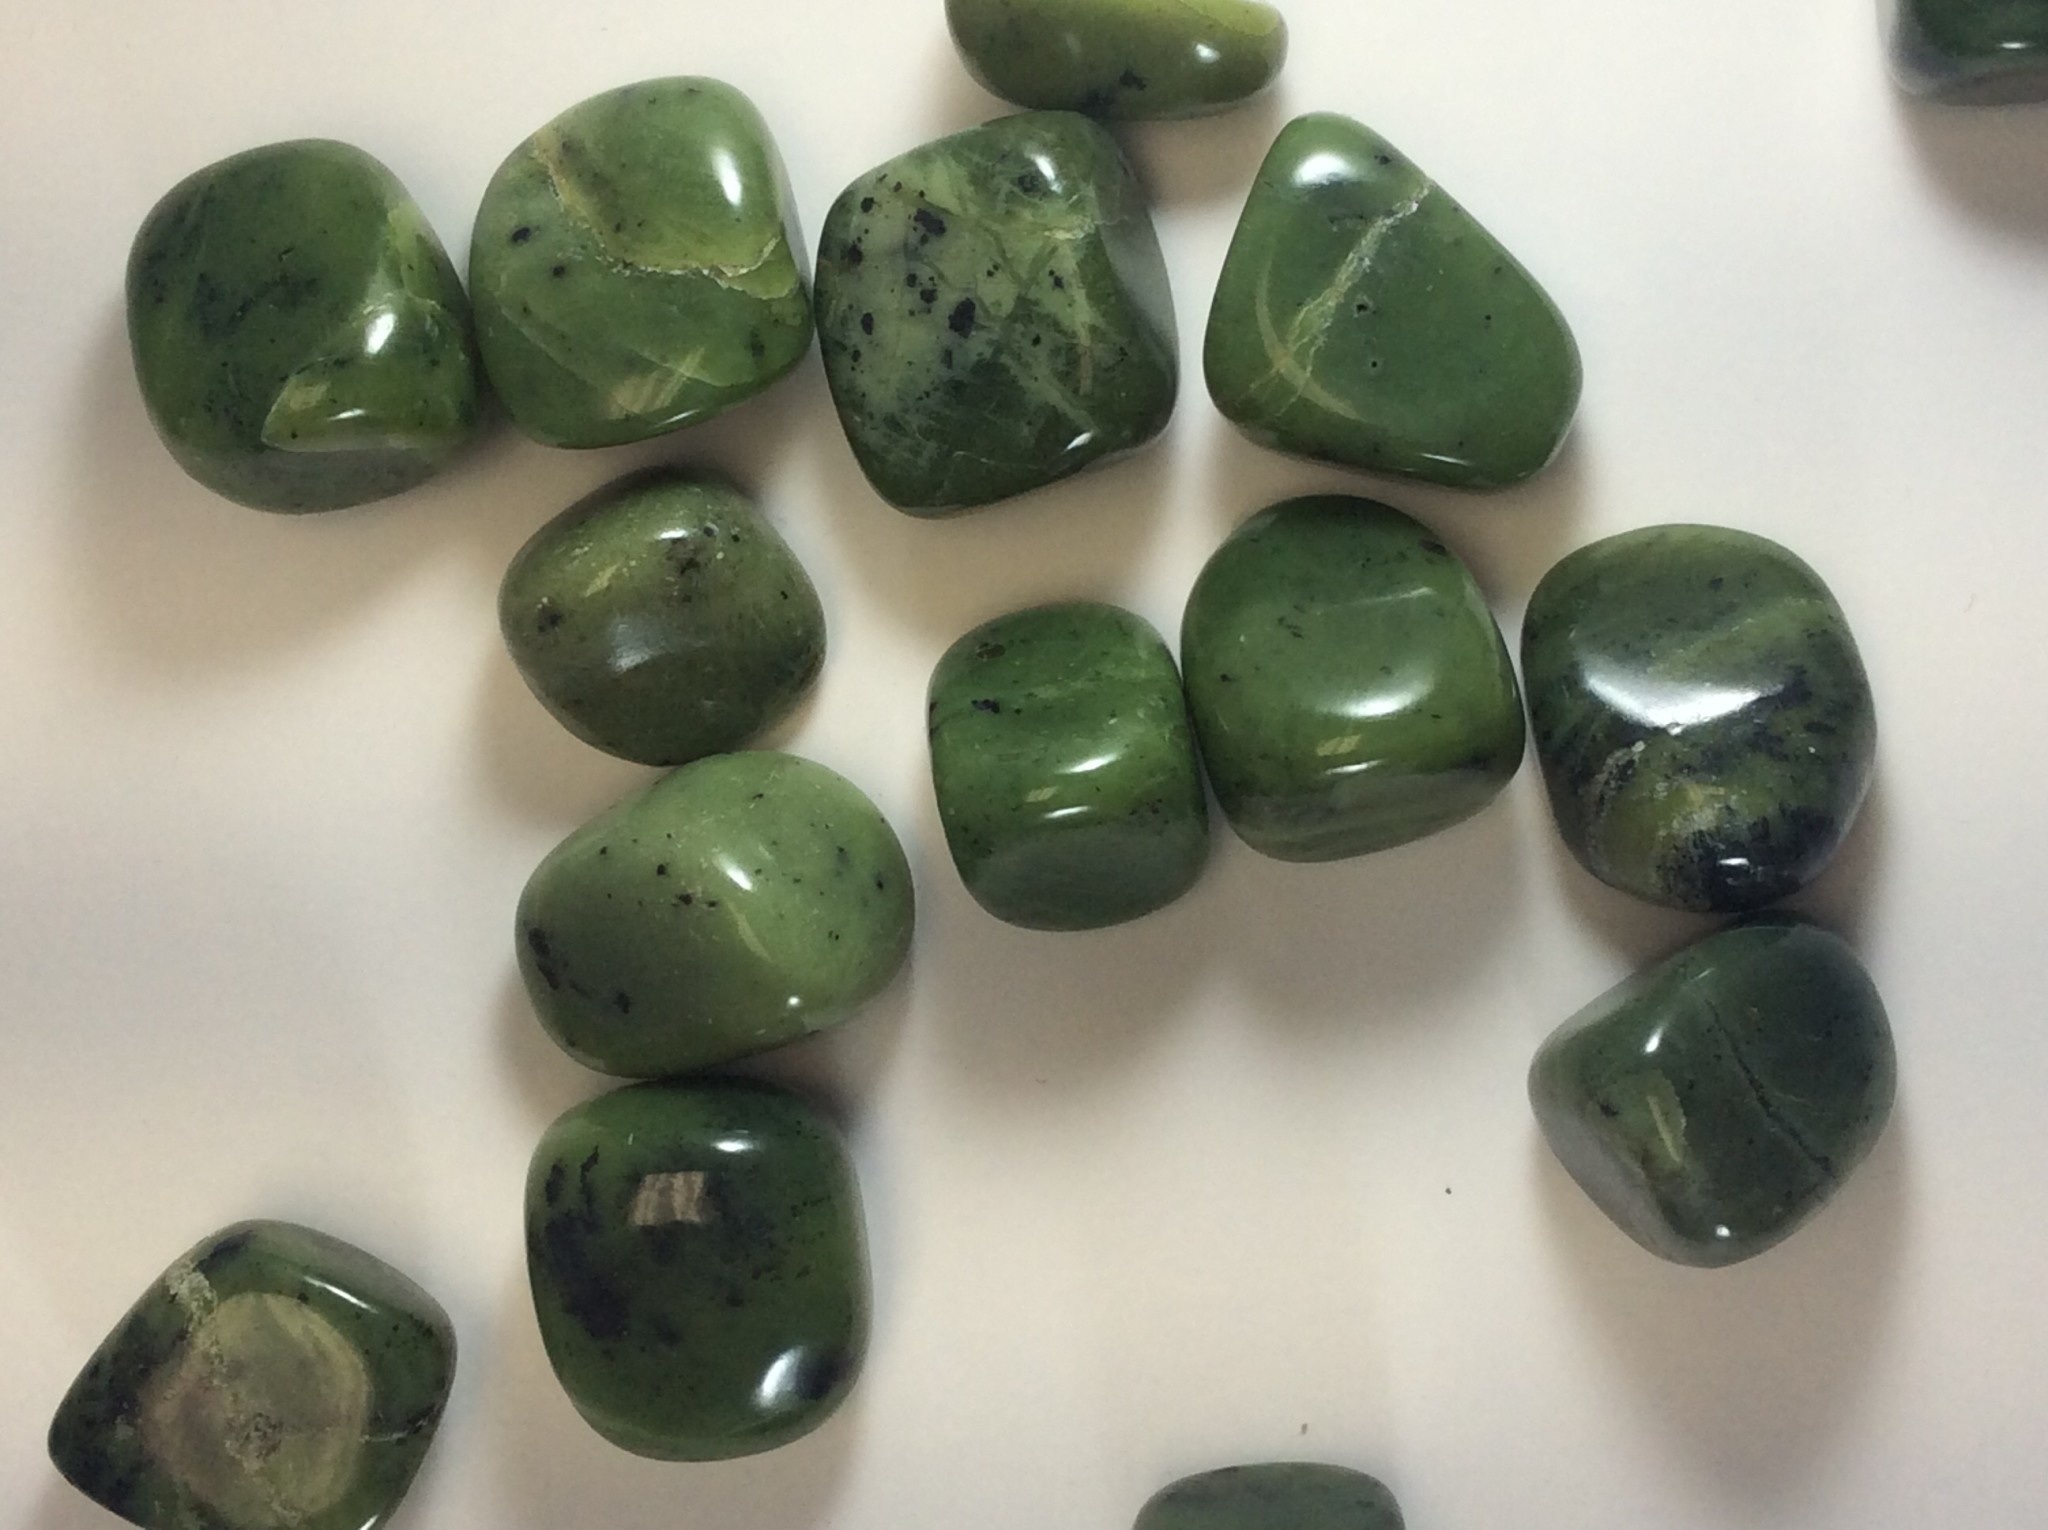 Jade Meanings, Properties and Uses - CrystalStones.com